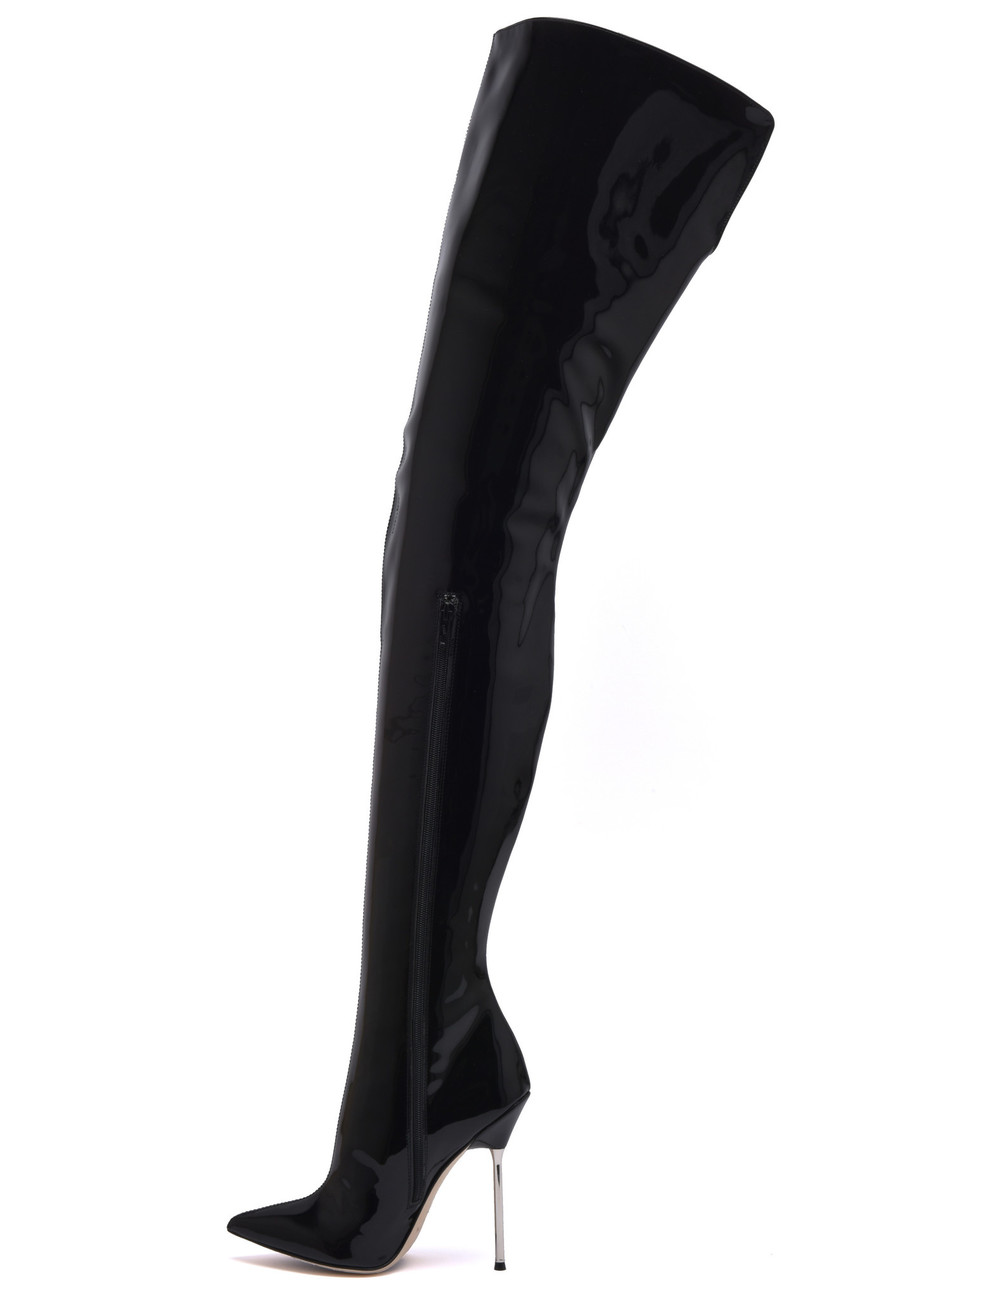 Sanctum  High Italian crotch boots GAIA with stiletto heels in genuine patent leather